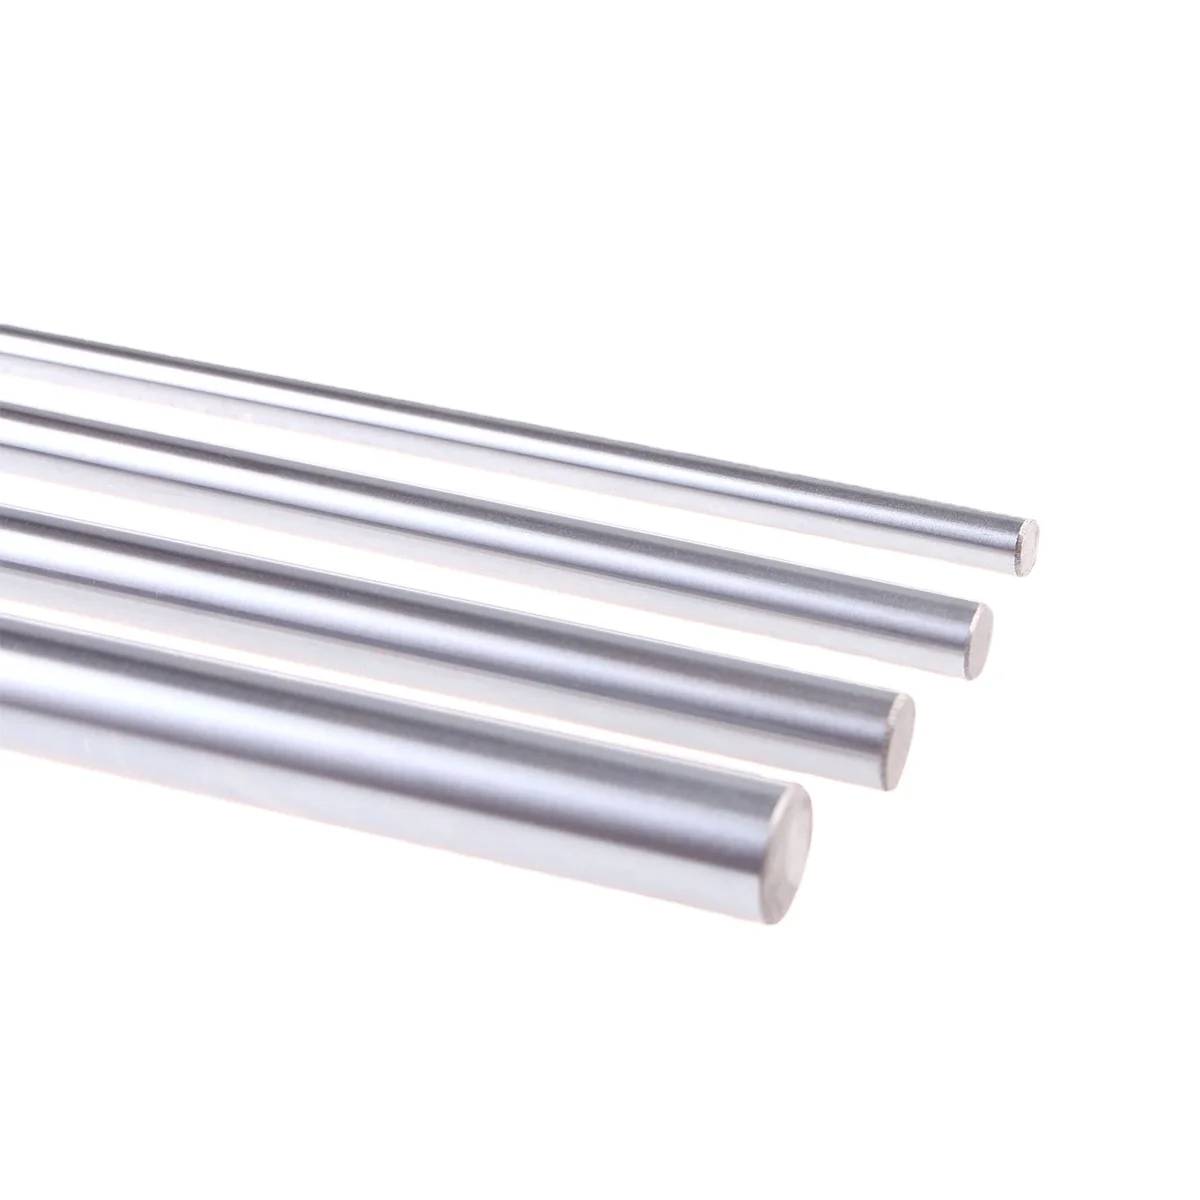 2pcs 6mm 8mm 10mm 12mm OD Linear Shaft Cylinder Rail Chrome Plated Round Smooth Rods Optical Axis for CNC 3D Printer Parts 8mm 10mm linear shaft round rod l100 150 200 250 300 350 400 450 500 chromed linear rail round rod optical axis for 3d printer